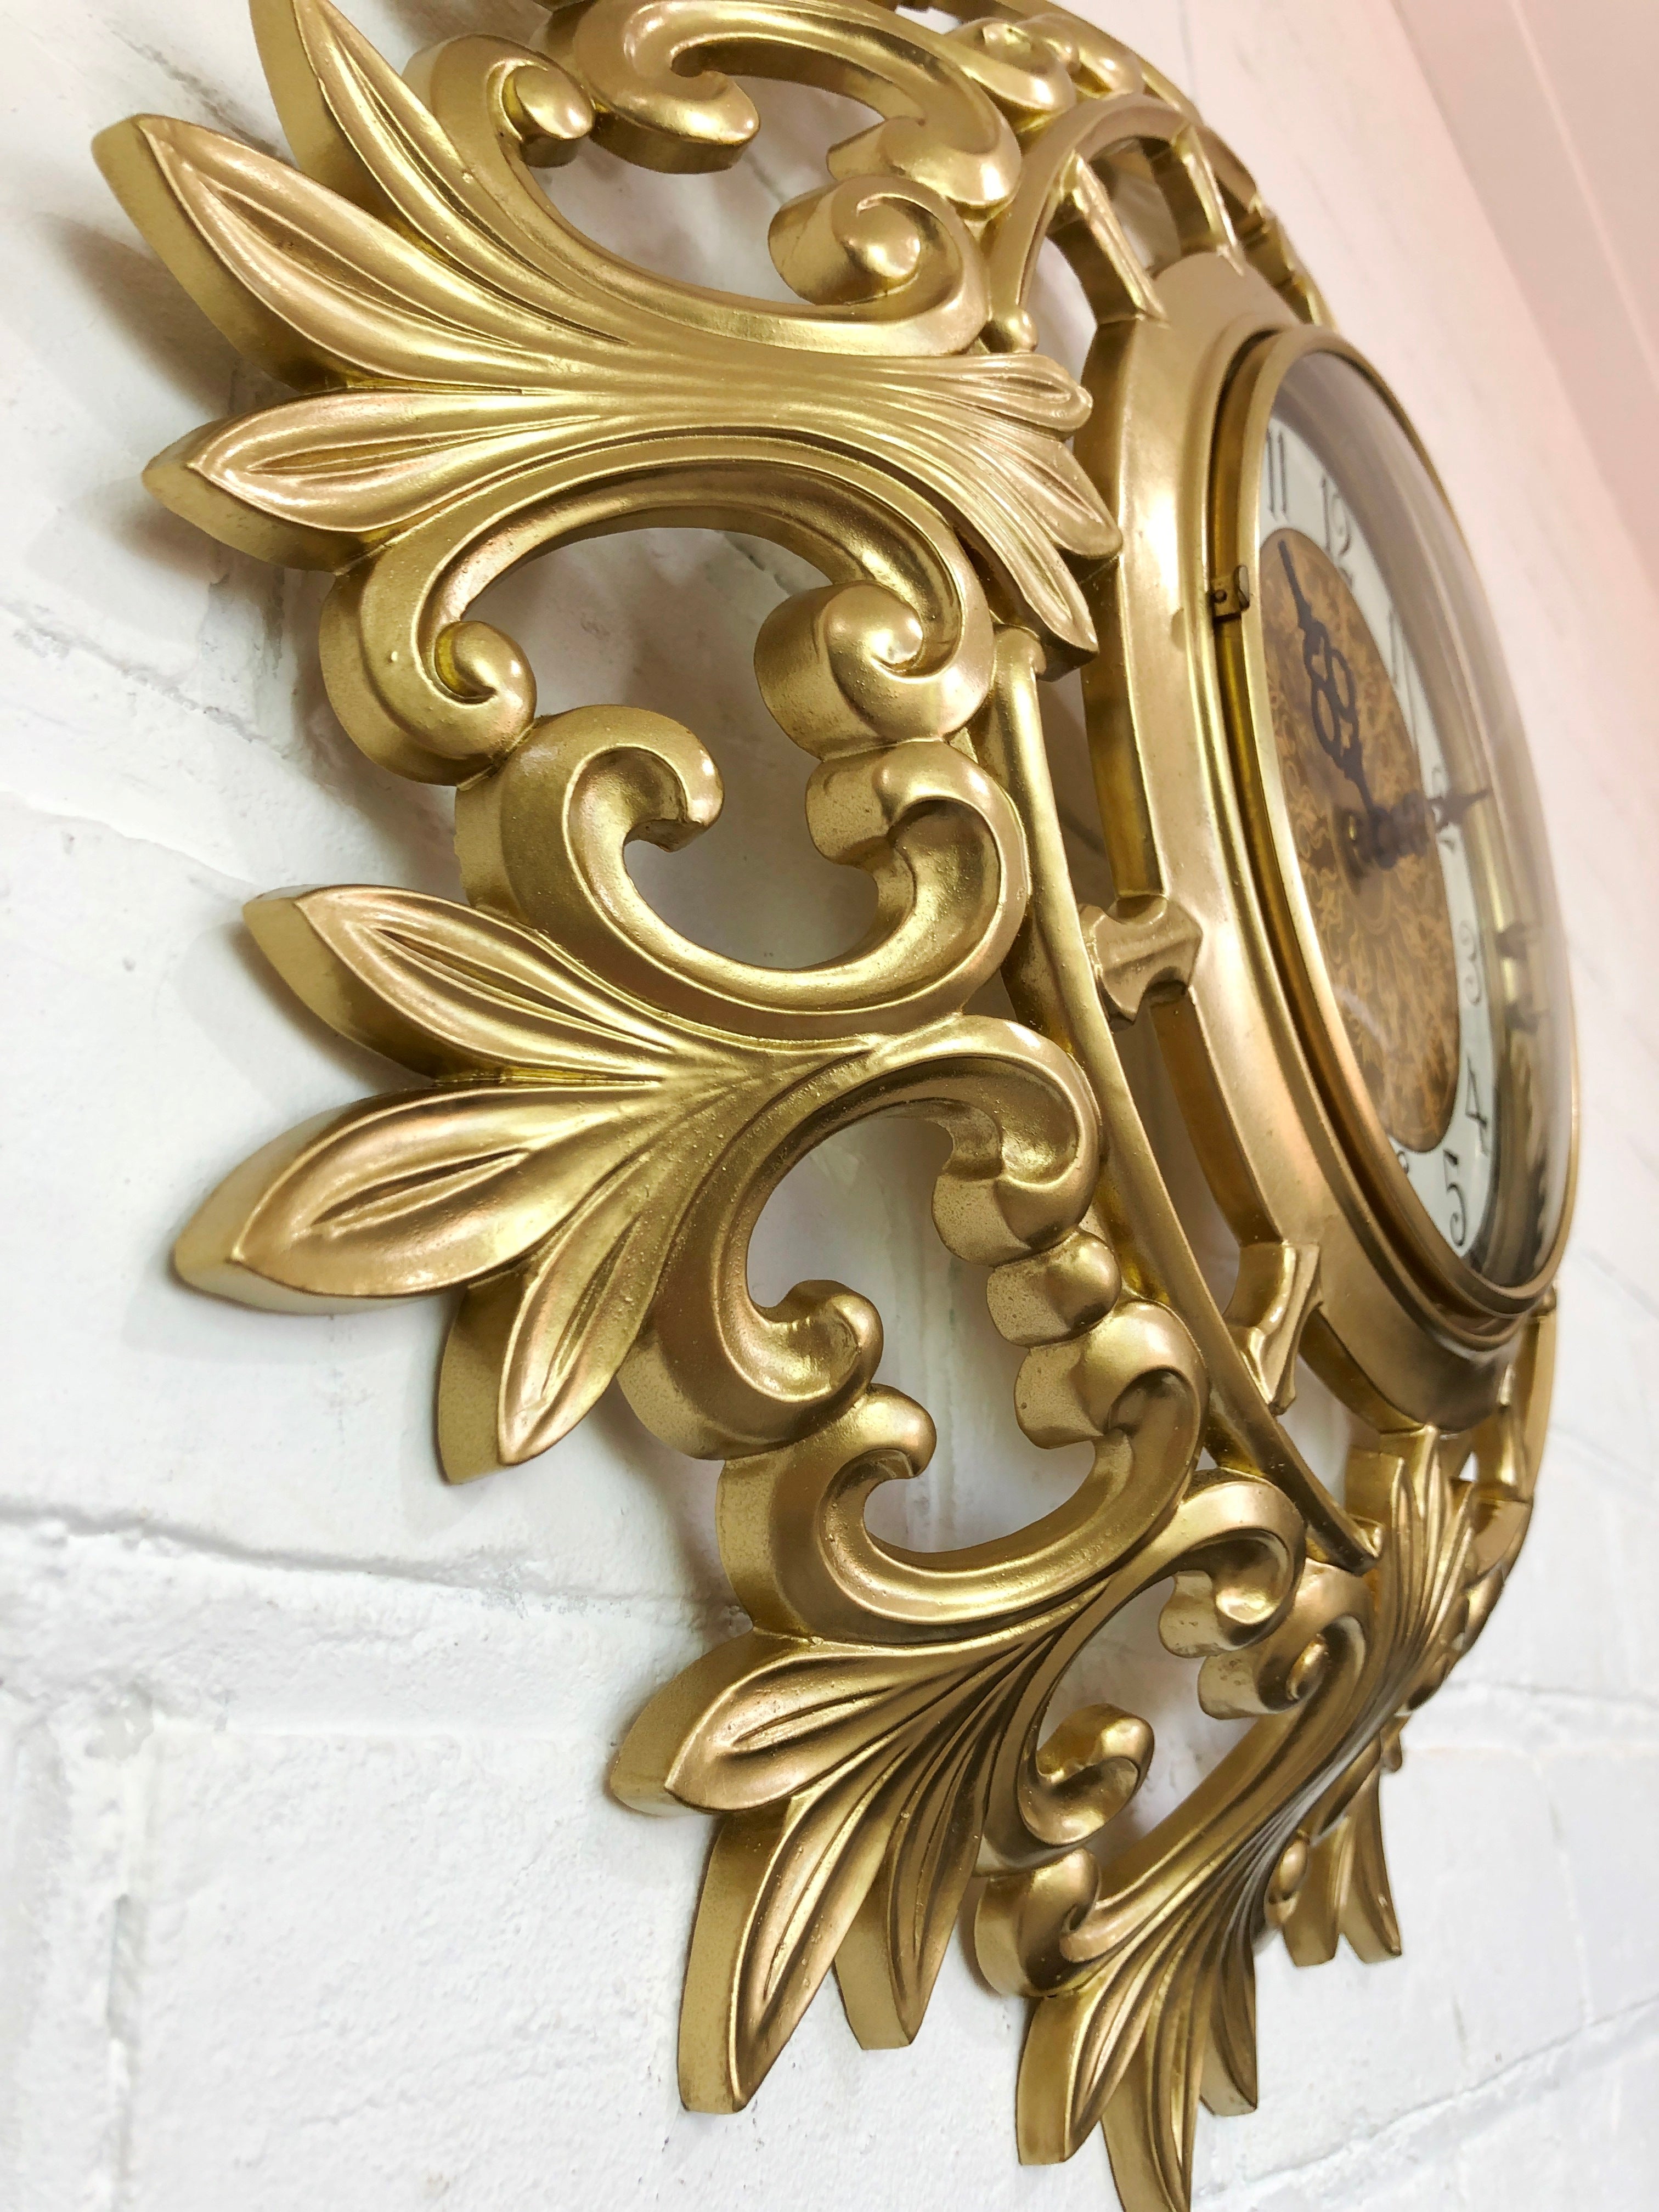 Vintage SYROCO Ornate Starburst Battery Wall Clock  | eXibit collection